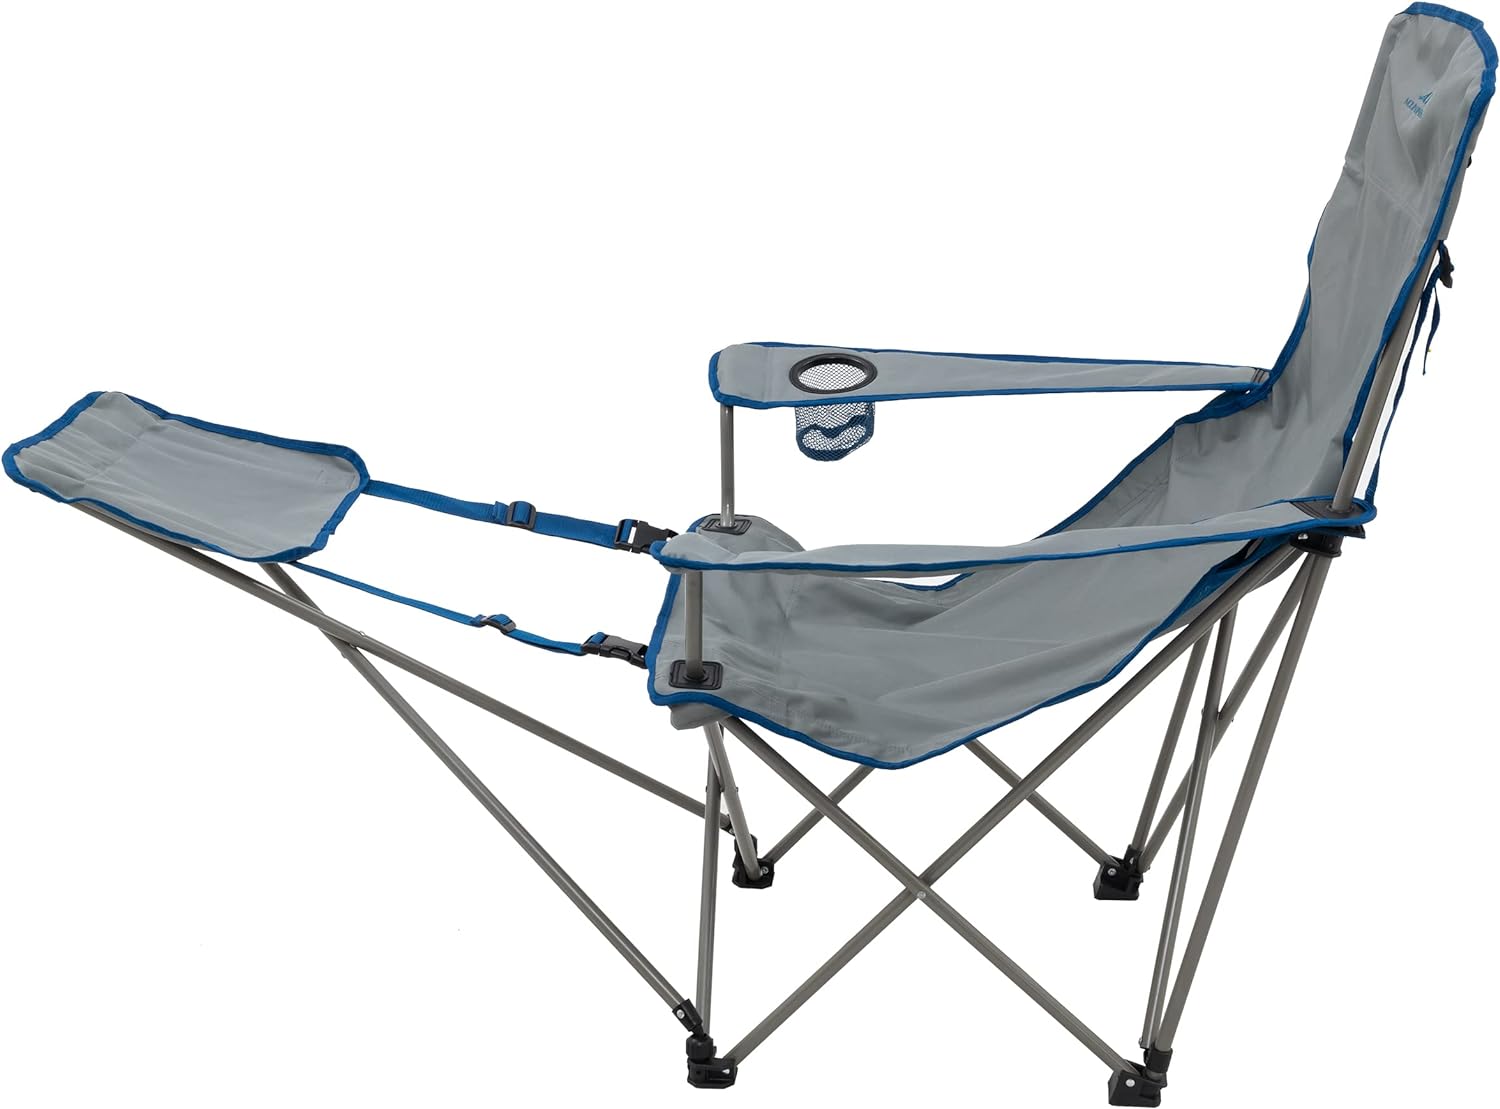 ALPS Mountaineering Escape Lounge Camping Chairs for Adults with Footrest and Adjustable Armrests, Sturdy Steel Frame, Compact Foldable Design, and Carry Bag